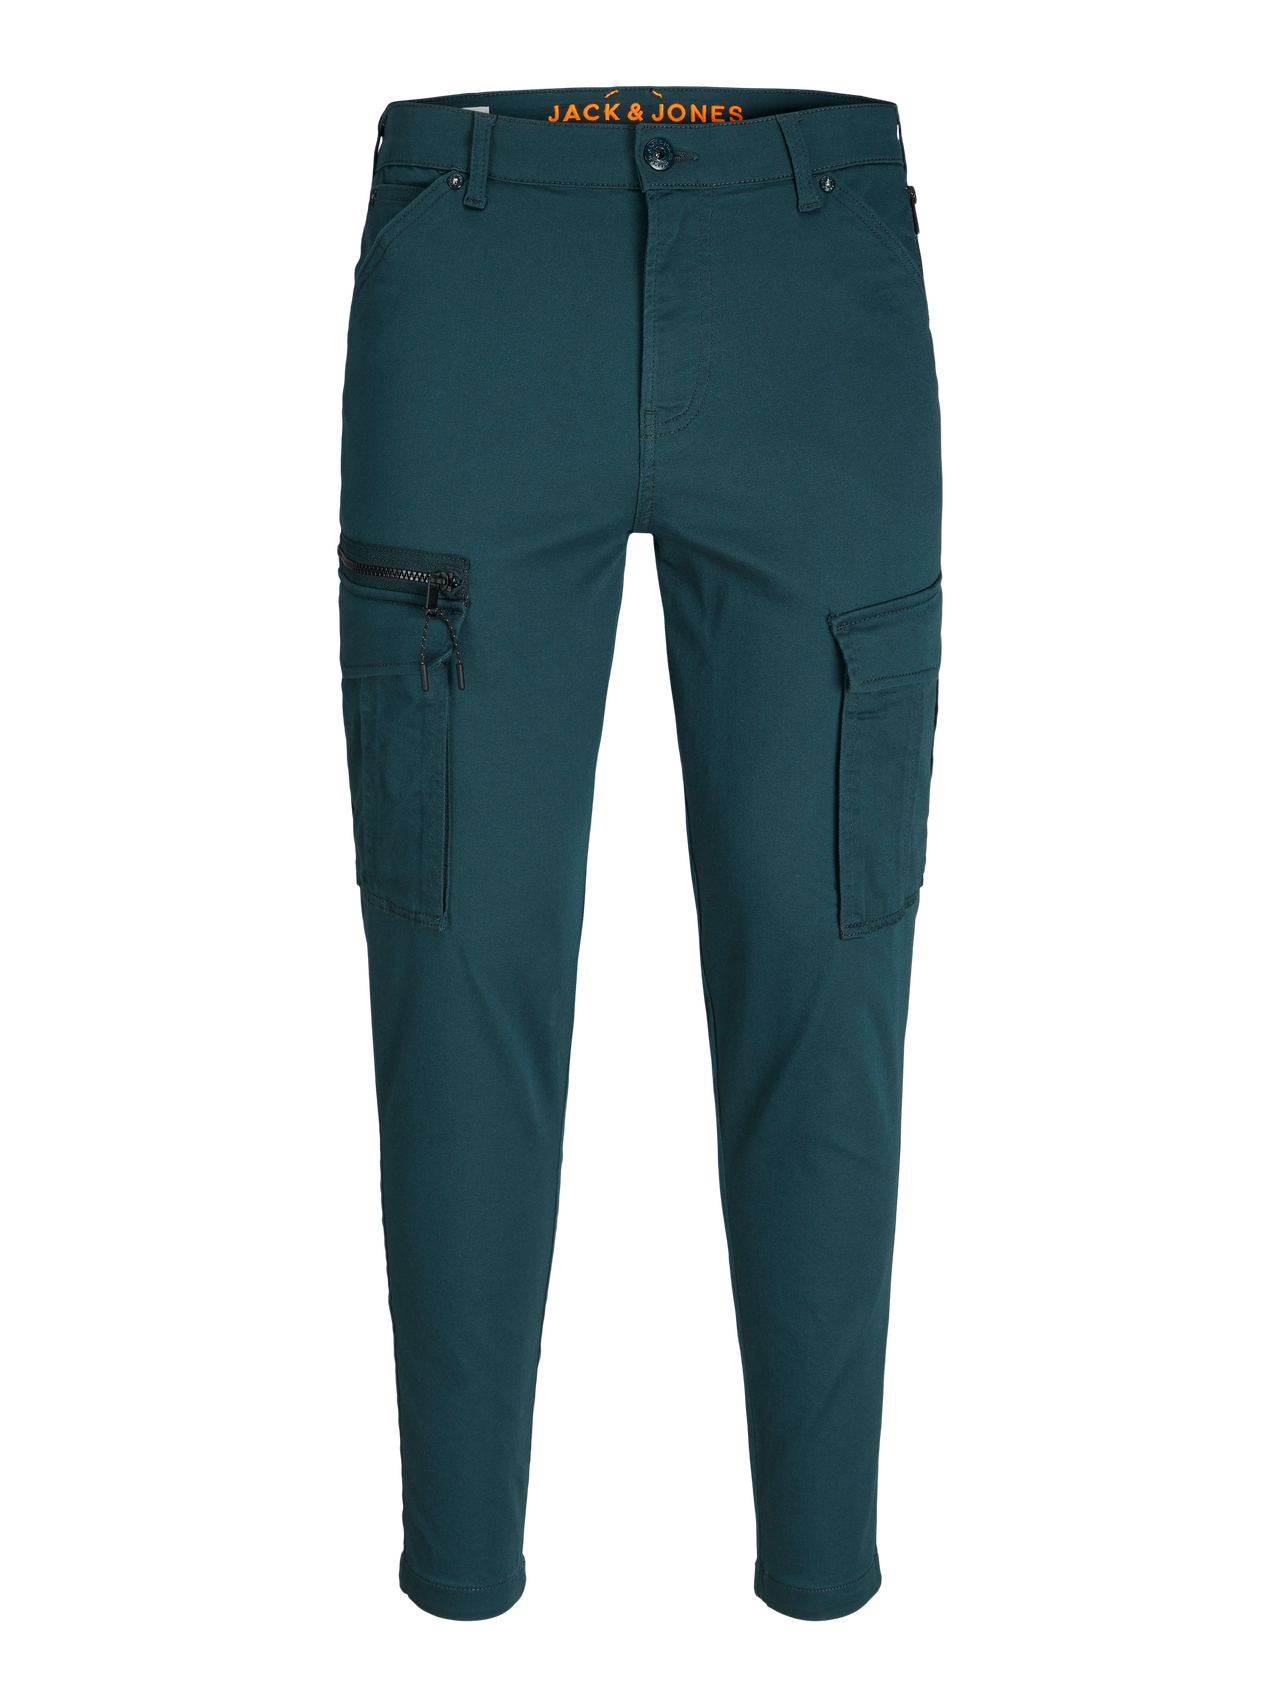 Jack & Jones Tapered Fit Cargo Pants -Magical Forest - 12194240